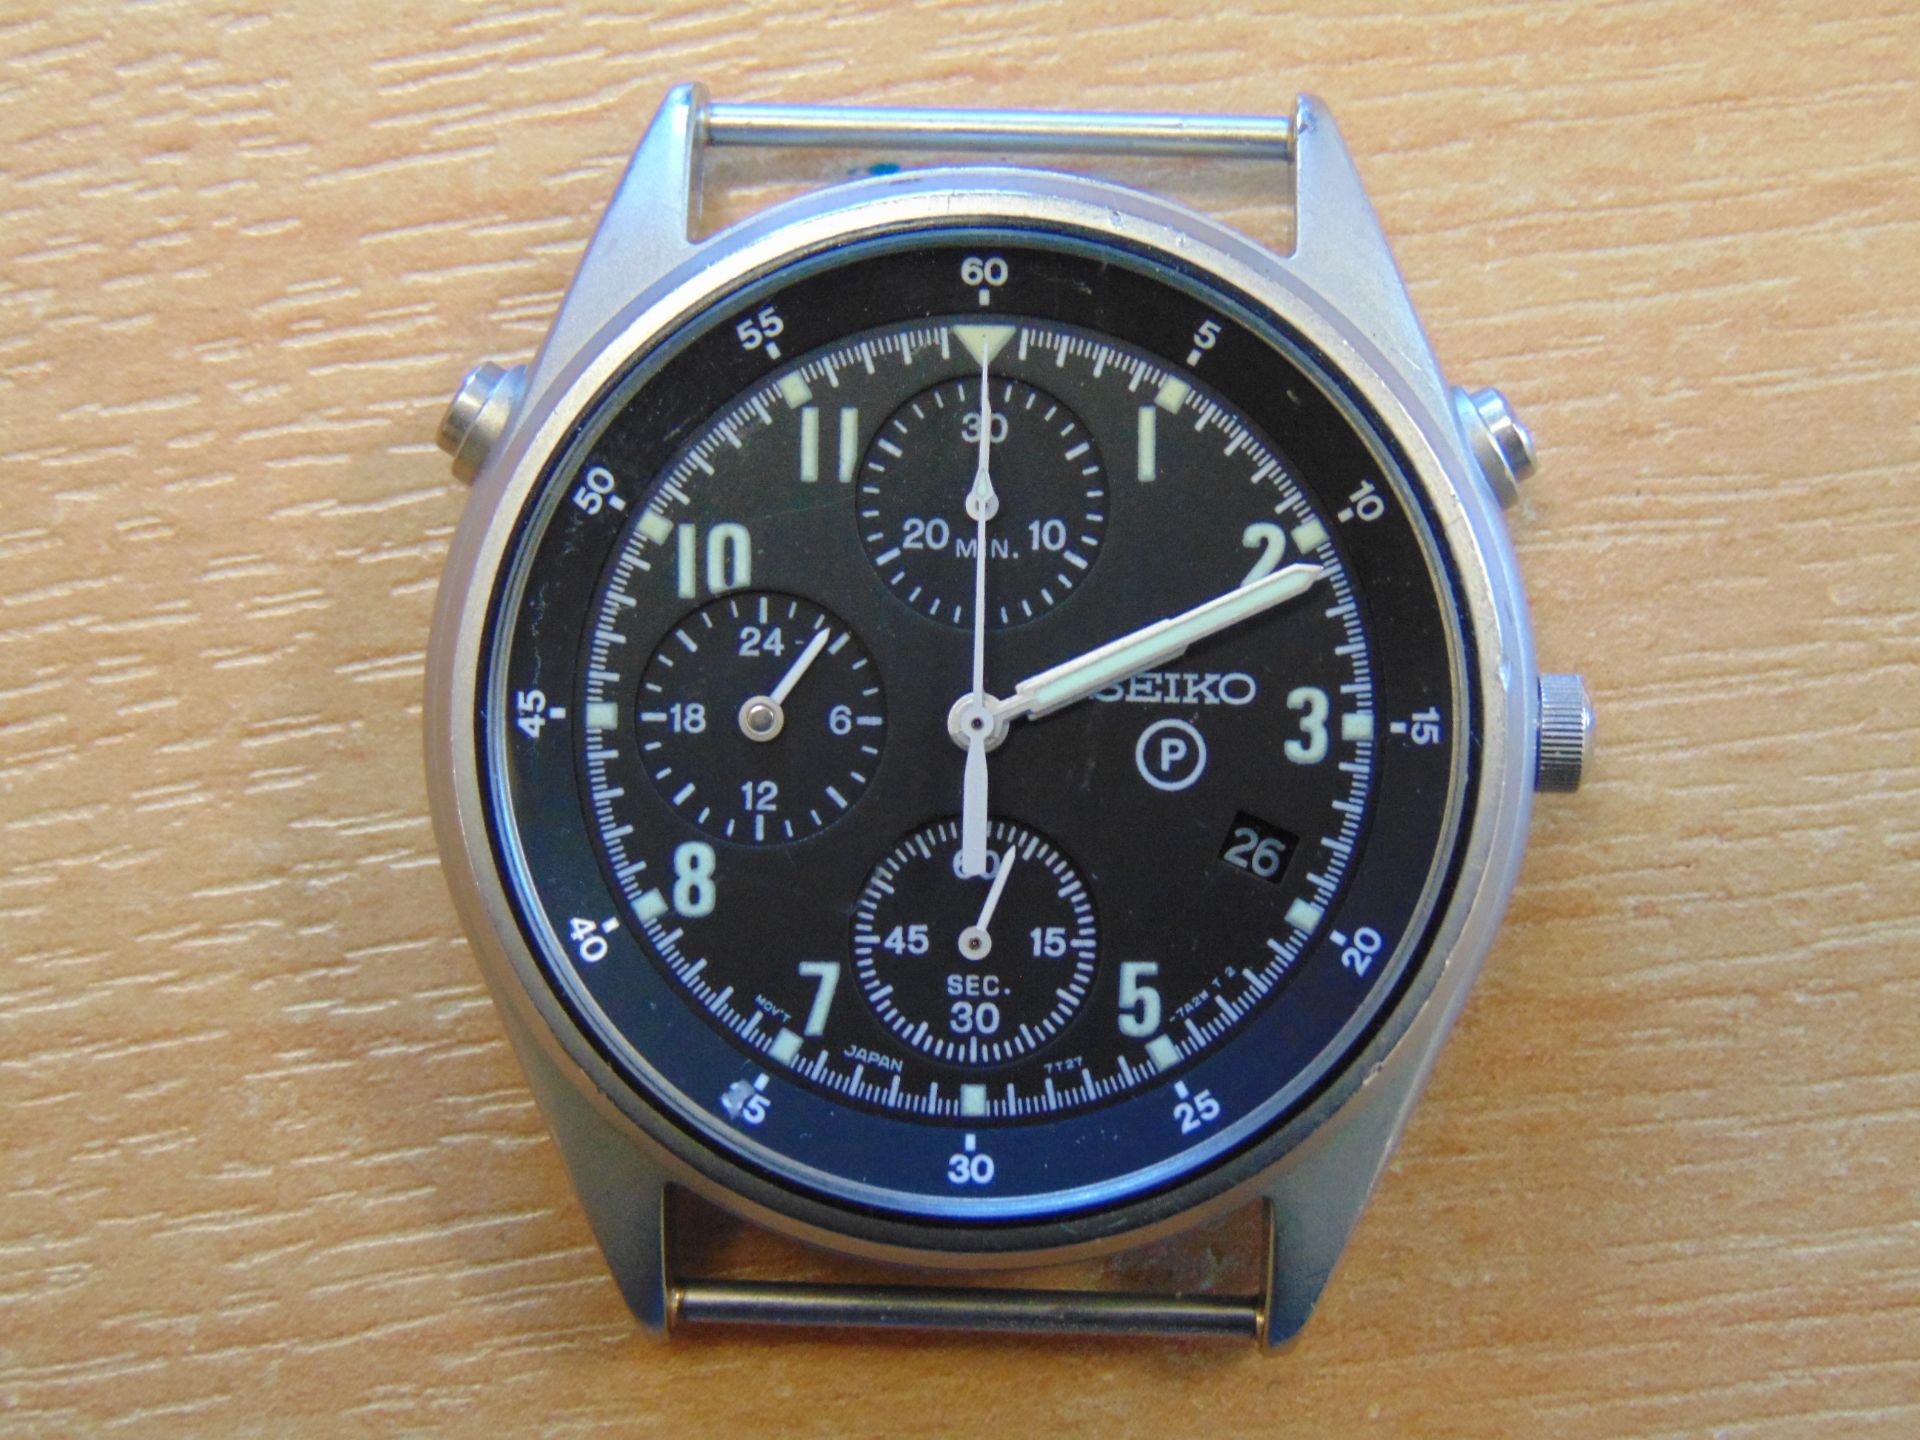 NICE CONDITION SEIKO GEN 2 (WITH DATE) RAF ISSUE PILOTS CHRONO NATO MARKS DATE 1996 -TORNADO FORCE - Image 2 of 7